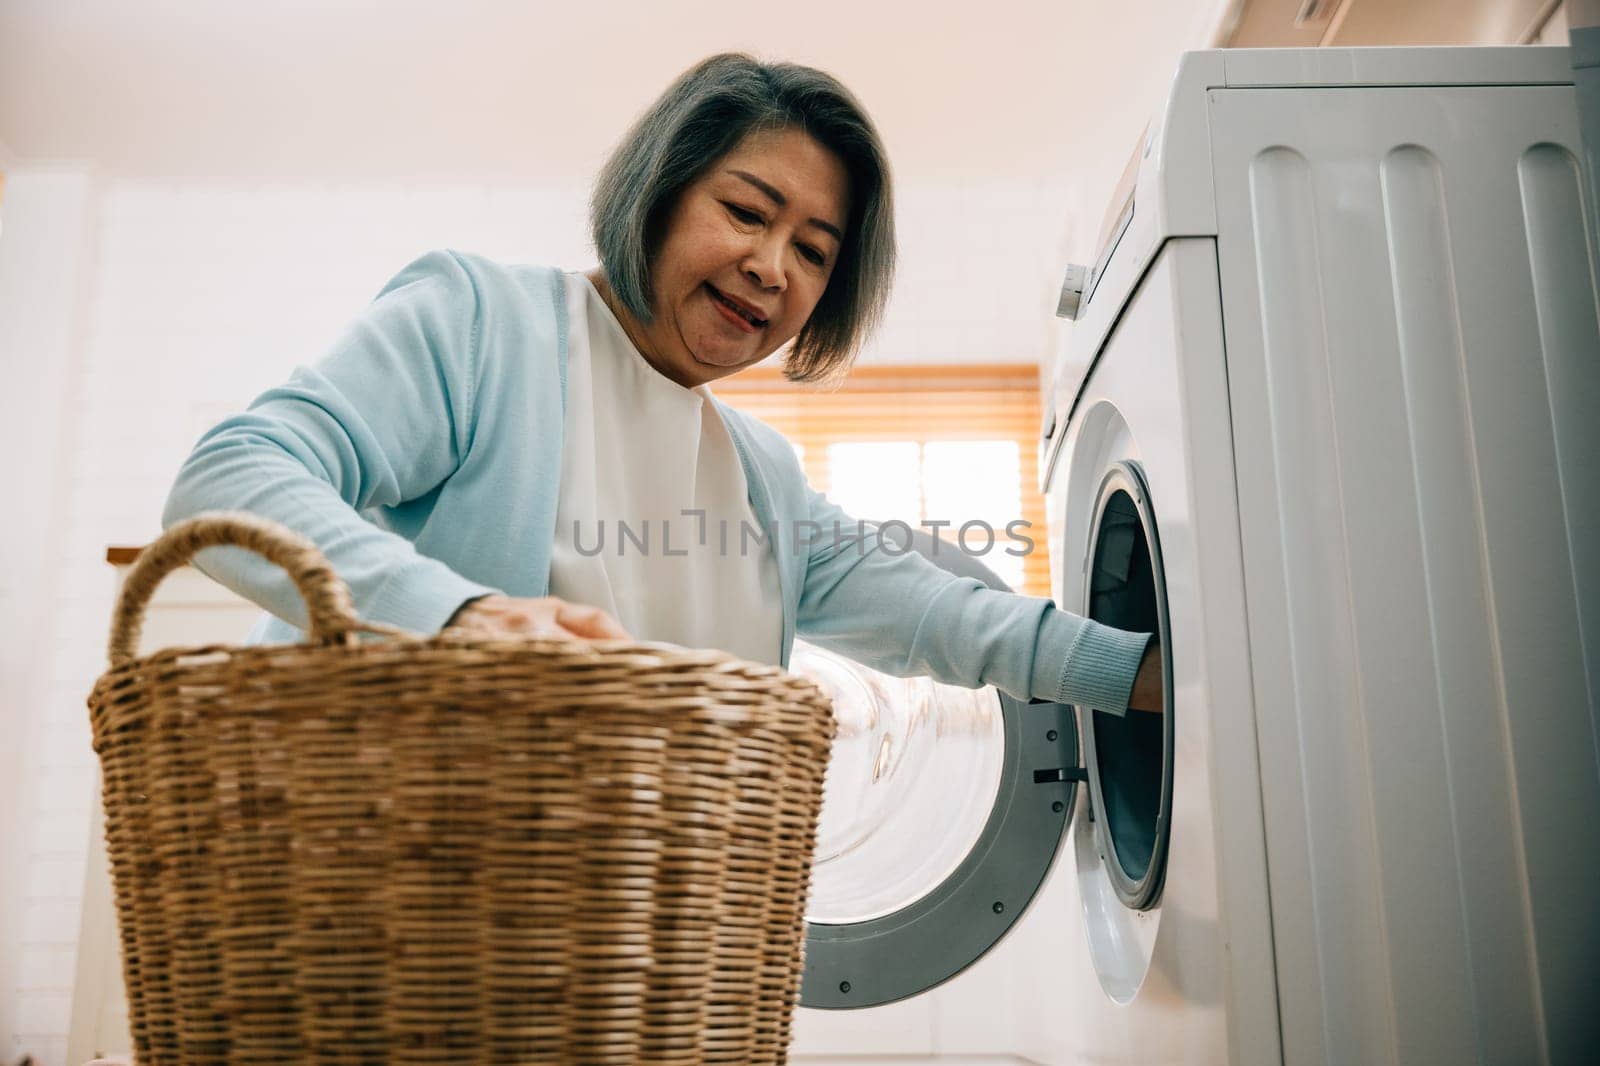 An old woman, a grandmother, loads laundry into the washing machine, smiling as she covers her routine. This portrait reflects a modern solution for family hygiene and happiness. by Sorapop